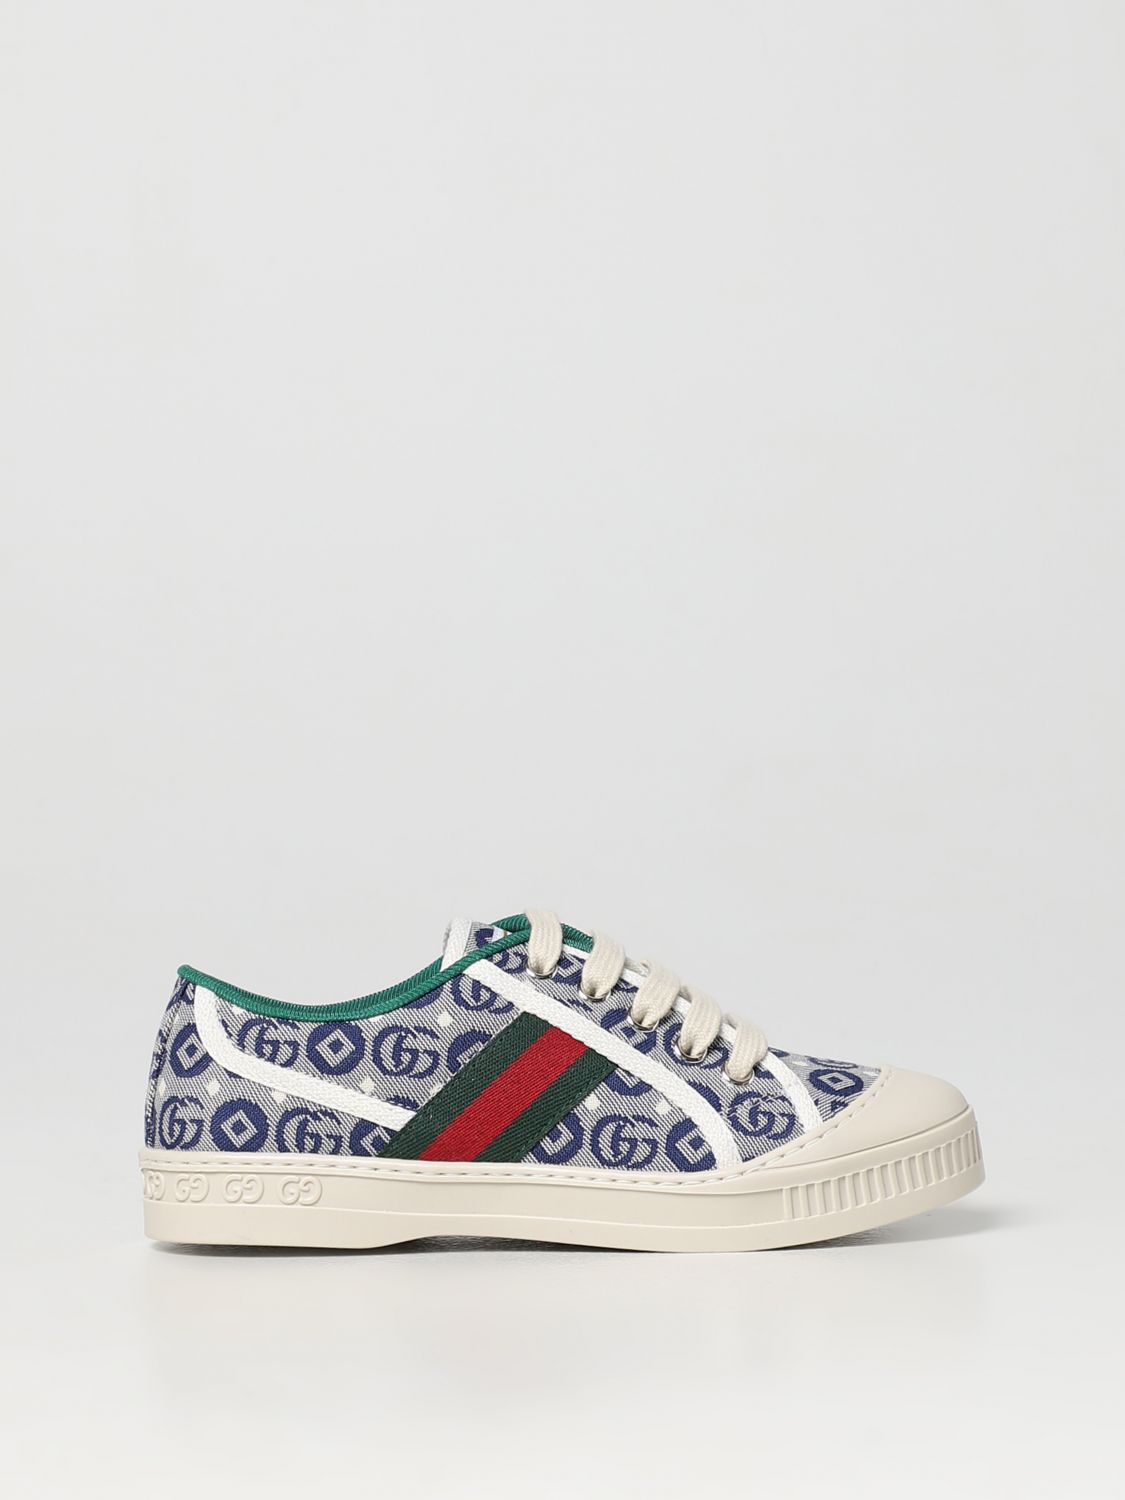 Knop Inspectie huichelarij GUCCI: sneakers in fabric with jacquard GG monogram - Blue | Gucci shoes  682230U4G50 online on GIGLIO.COM